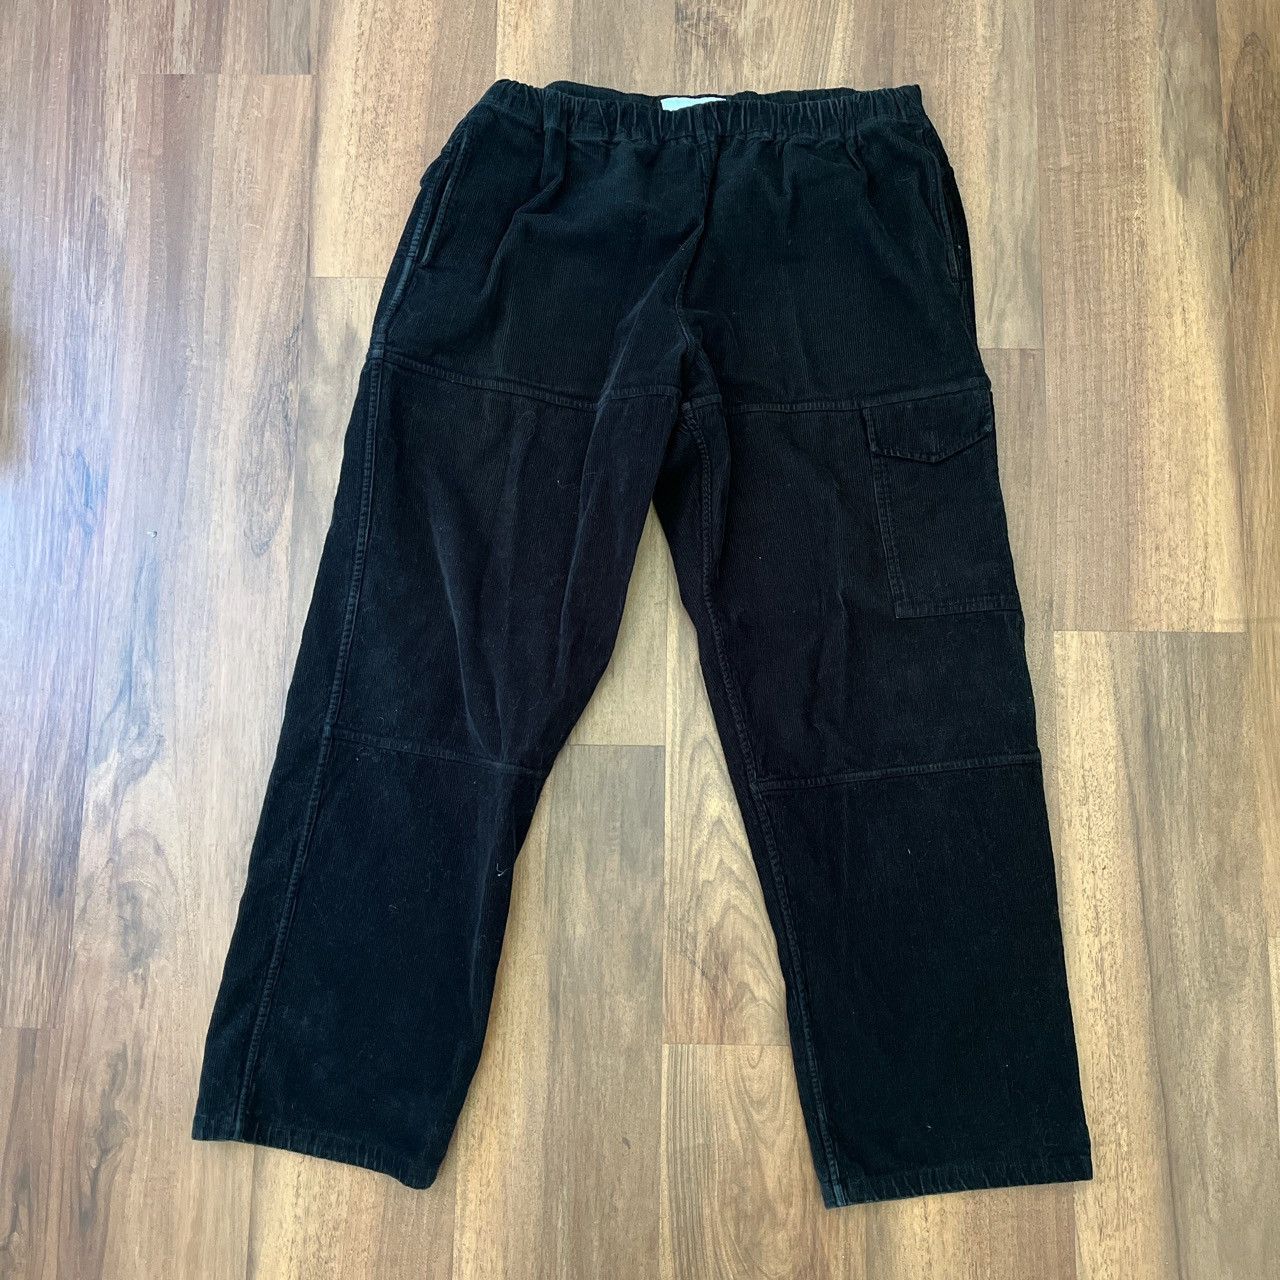 18 East 18 East Cludach Fishing Wader Pants | Grailed